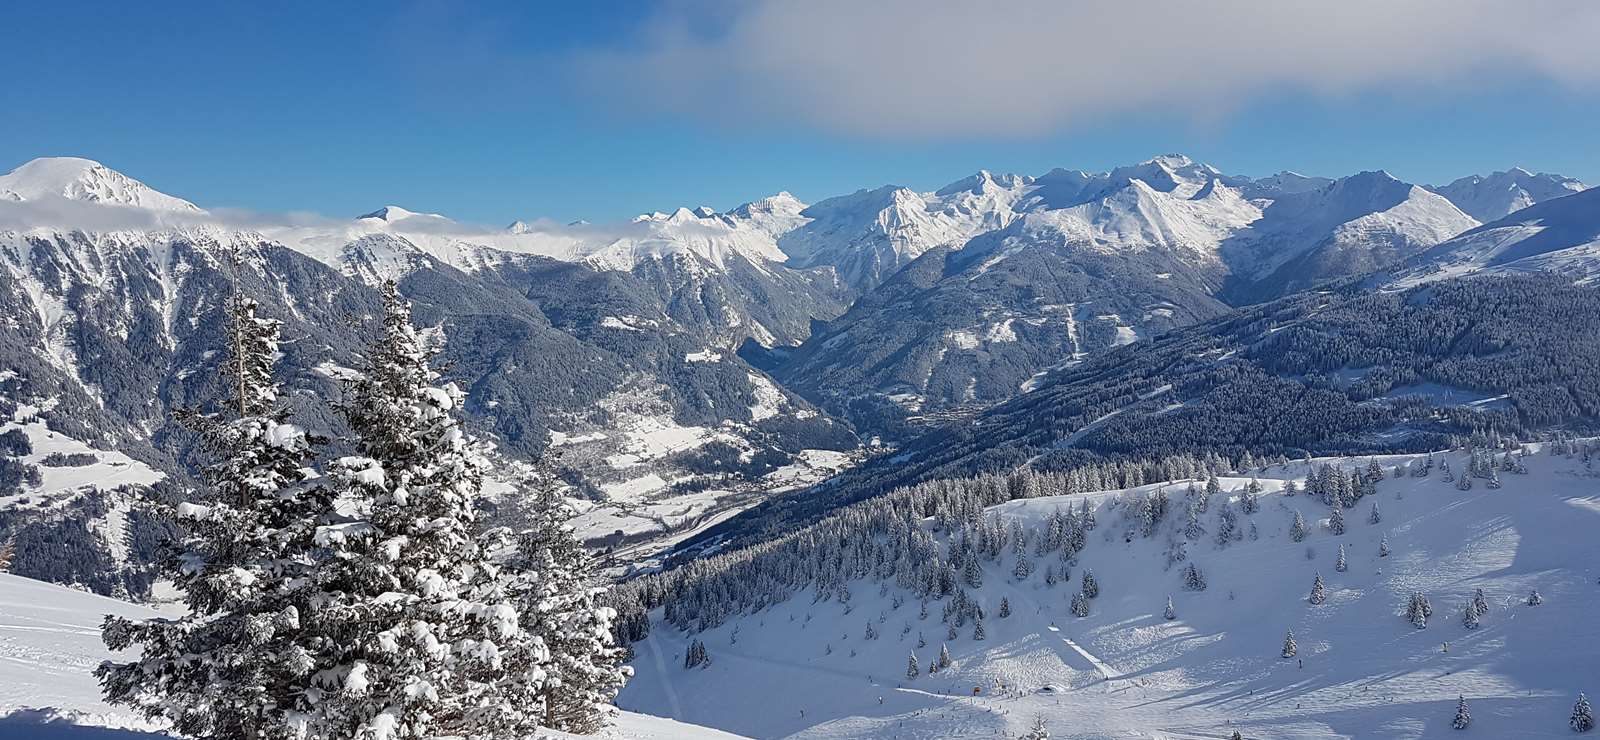 View of the Gastein valley